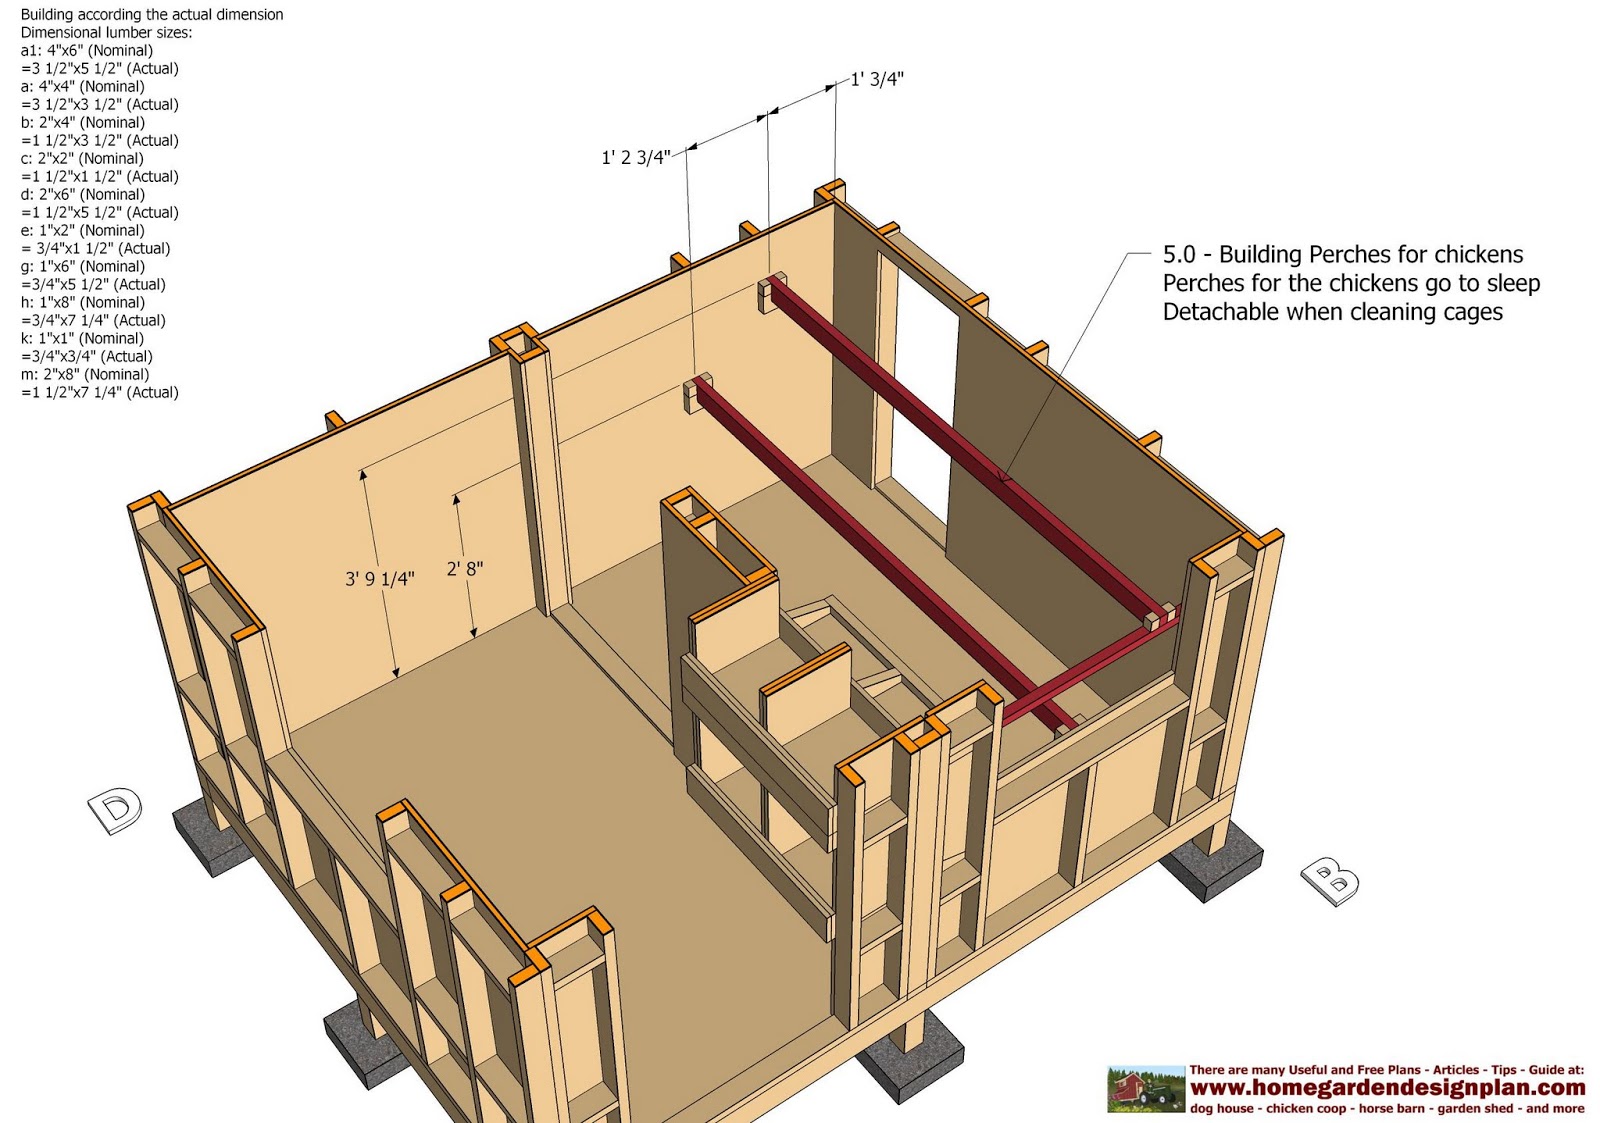 Bobbs: Outdoor storage shed plans instructions